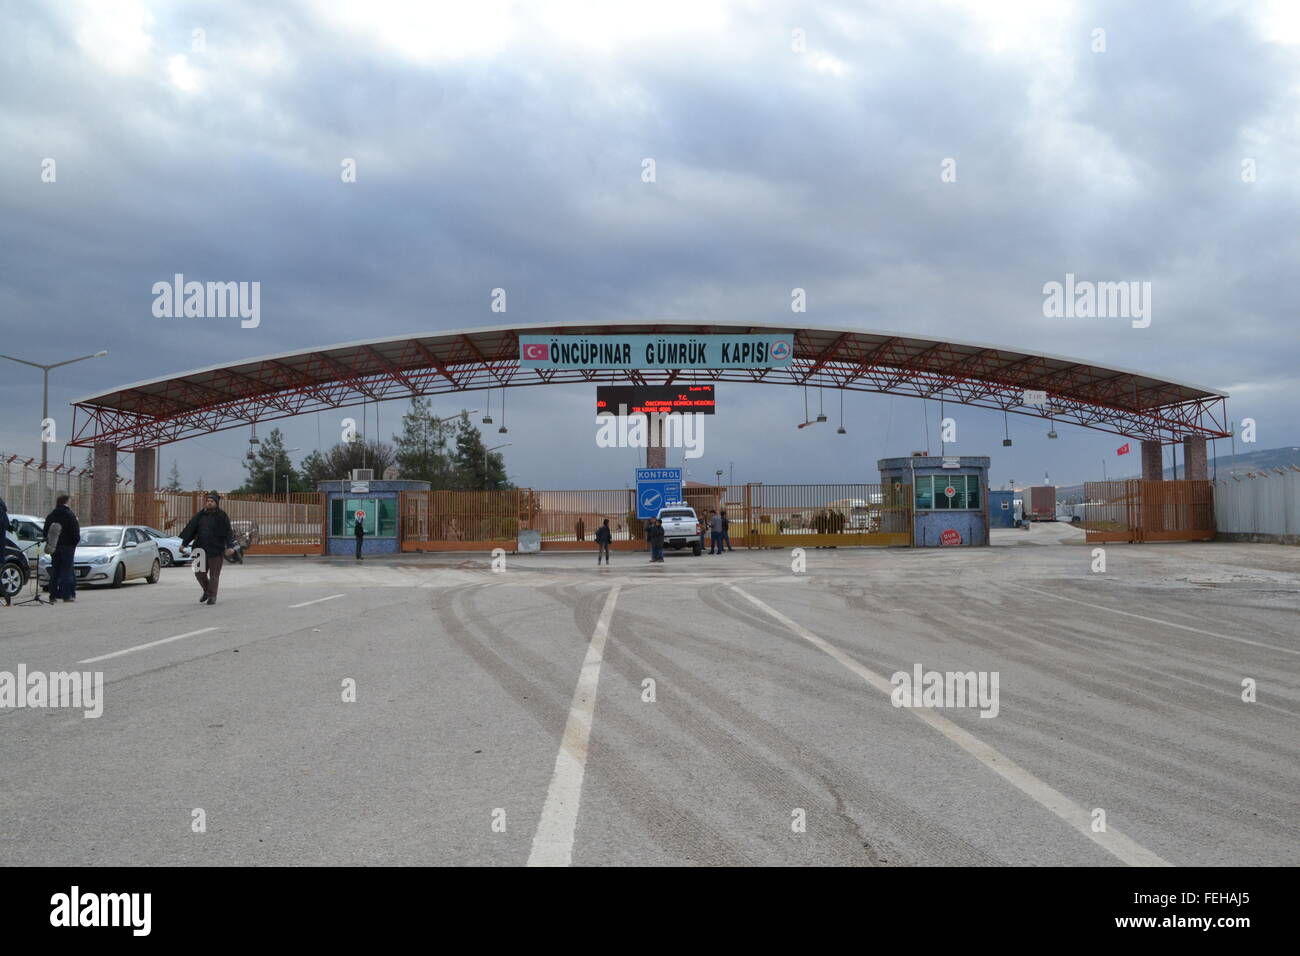 The border crossing between Turkey and Syria at Kilis is closed on 07 February 2016. There is little coming in either direction except for an occassional aid truck or ambulances. Tens of thousands of Syrians are waiting inside Syria to be able to enter Turkey but for now the borders are shut. Photo: Shabtai Gold/dpa Stock Photo